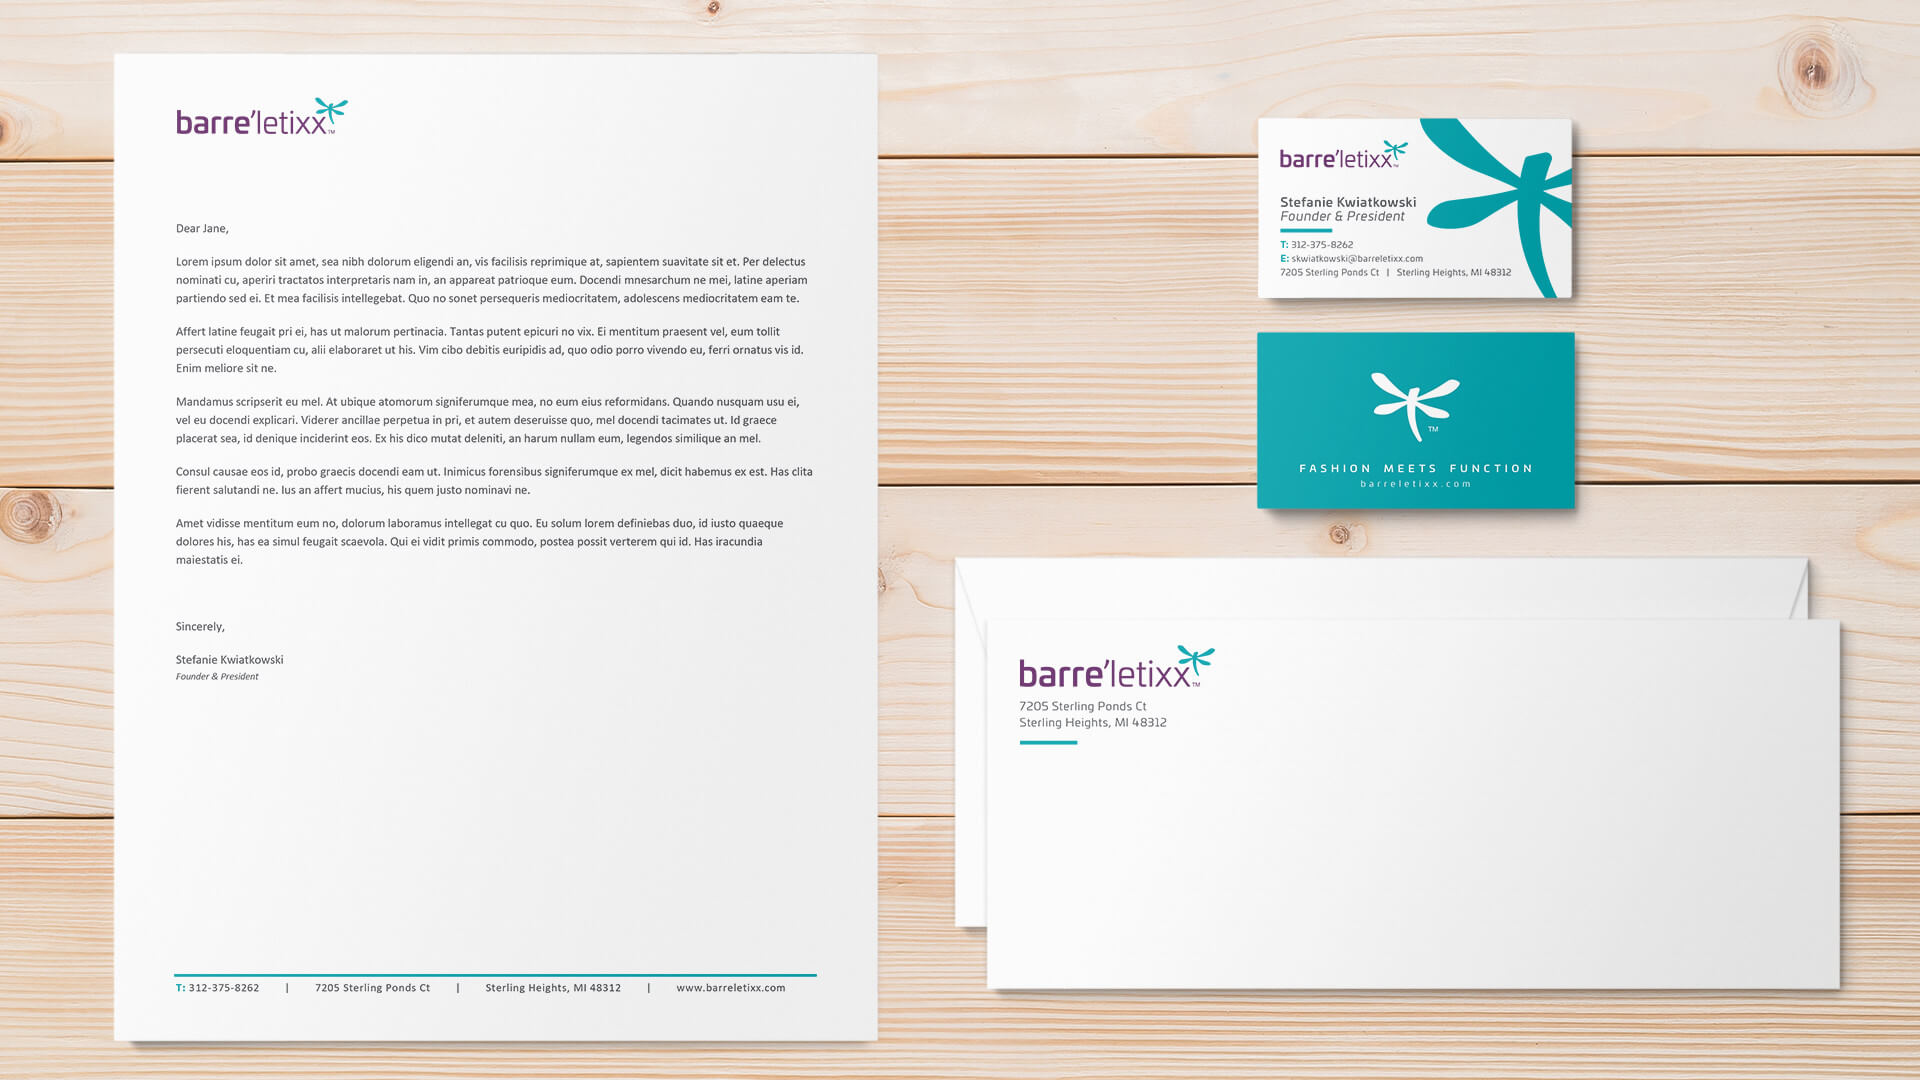 Fulkrum designed the business cards, letterhead, envelopes and packaging design for barre'letixx